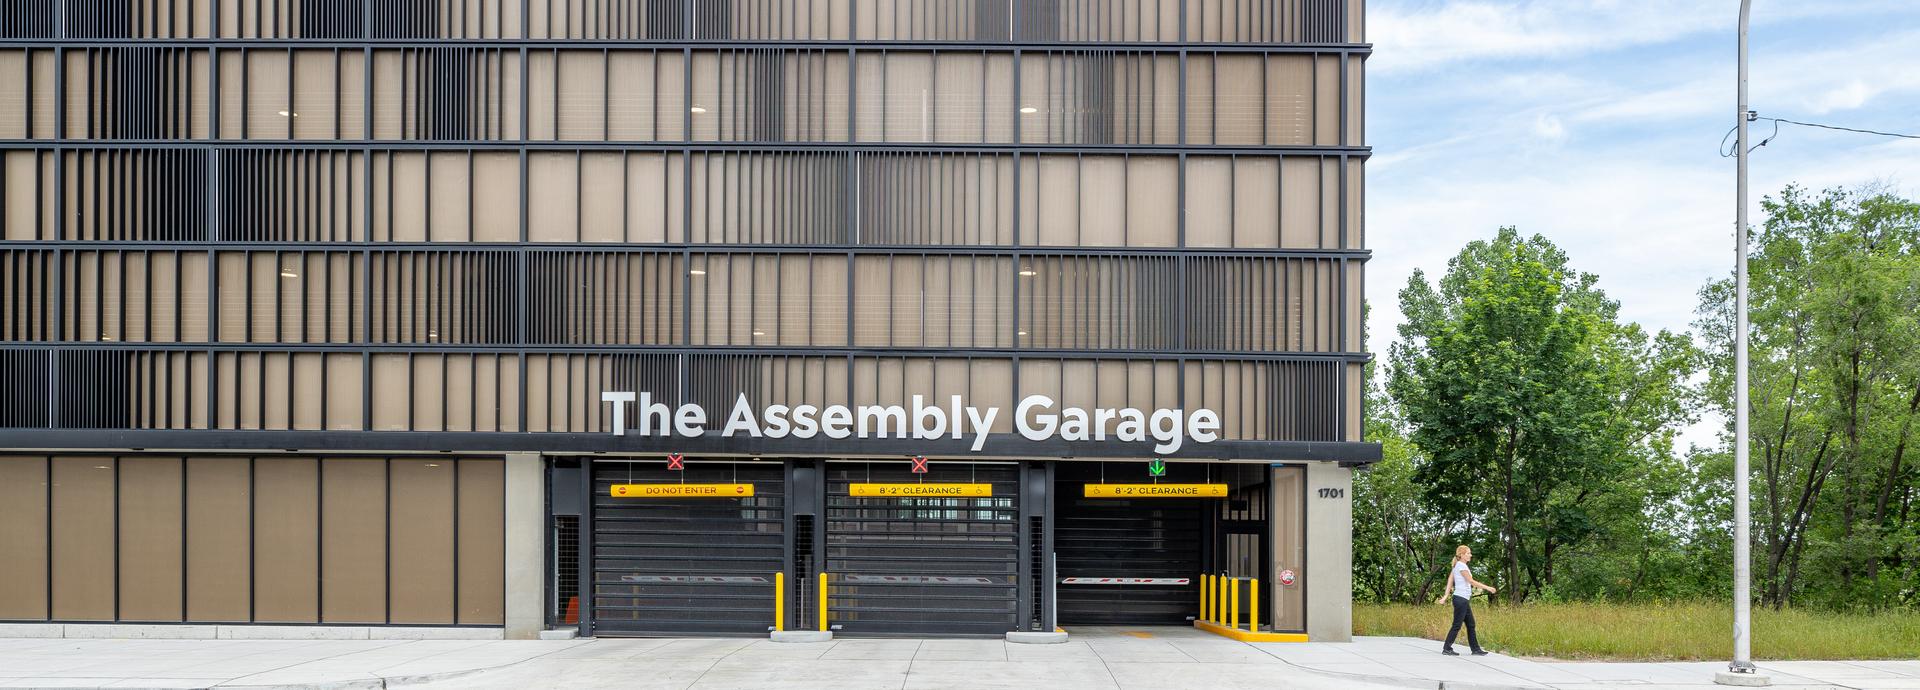 The-Assembly-Garage_2.tif